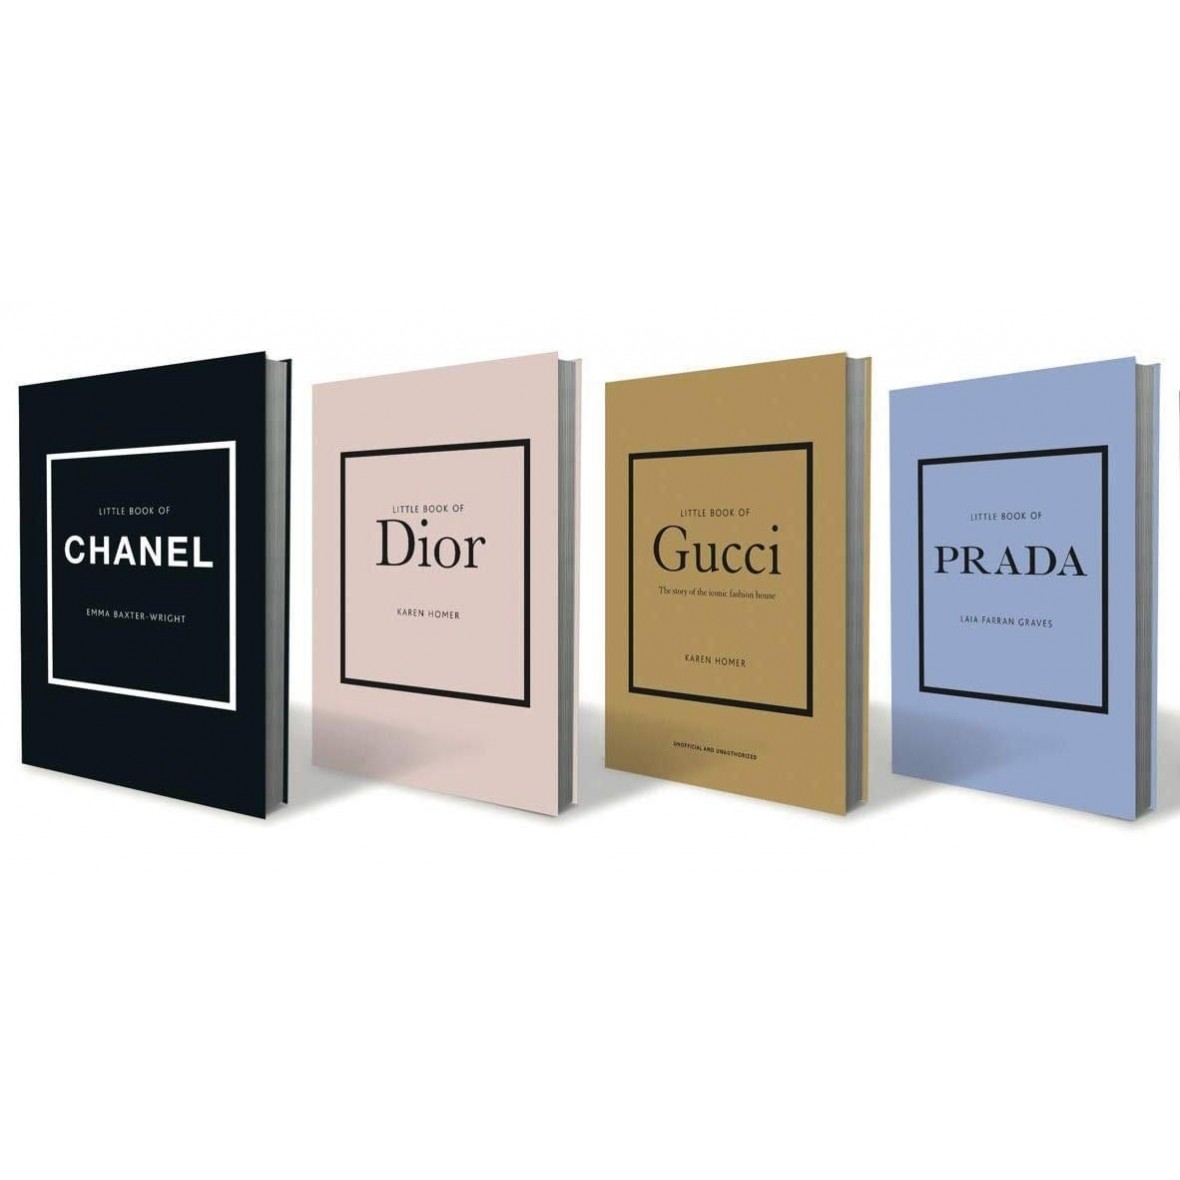 CHANEL The little book of Chanel by Emma Baxter-Wright. NEU.